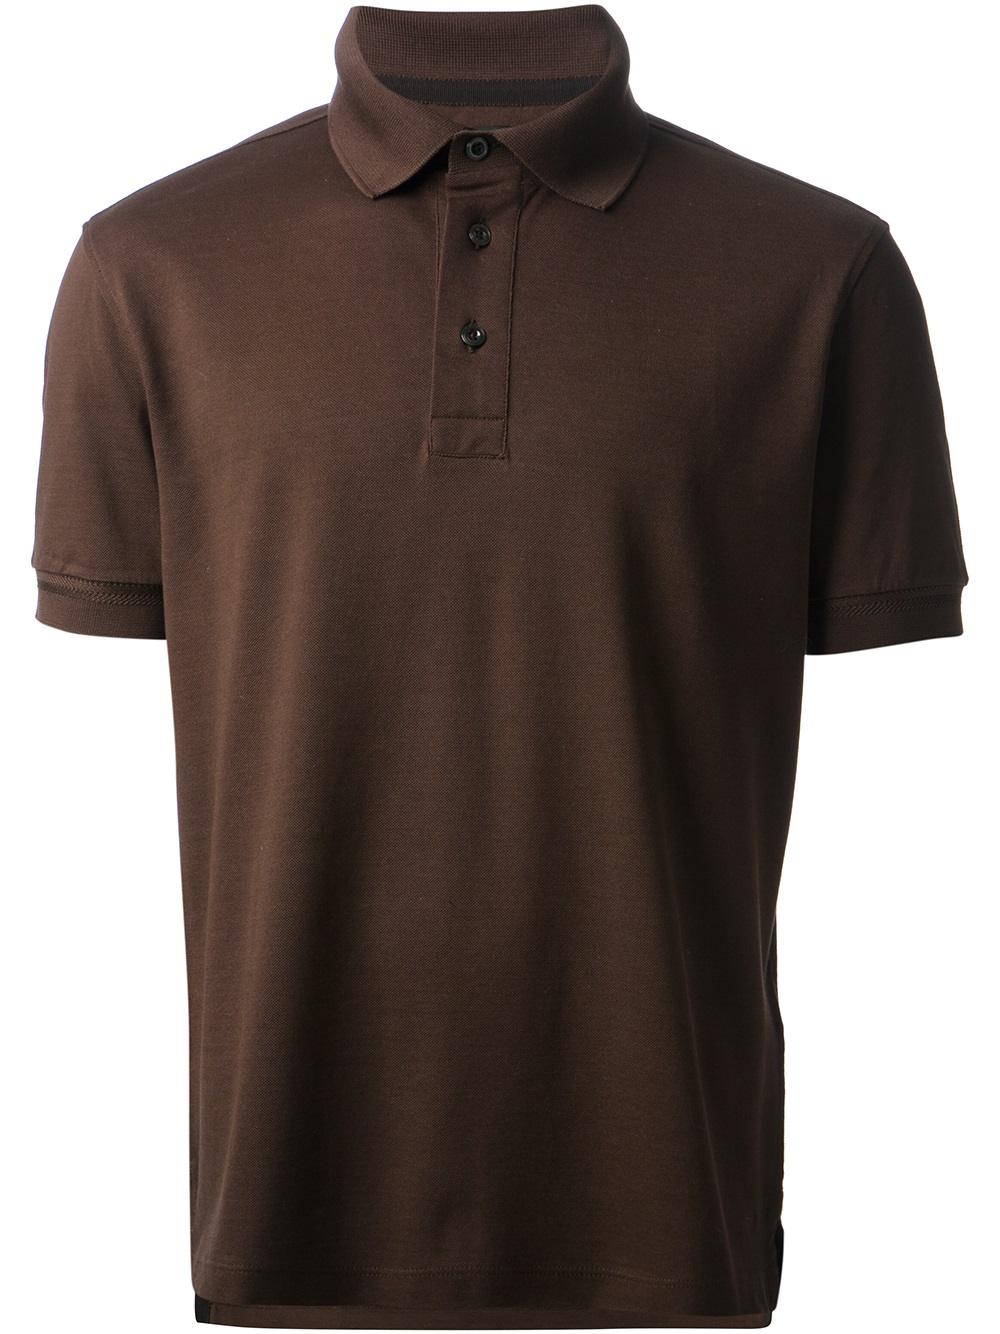 Tom Ford Classic Polo Shirt in Brown for Men - Lyst